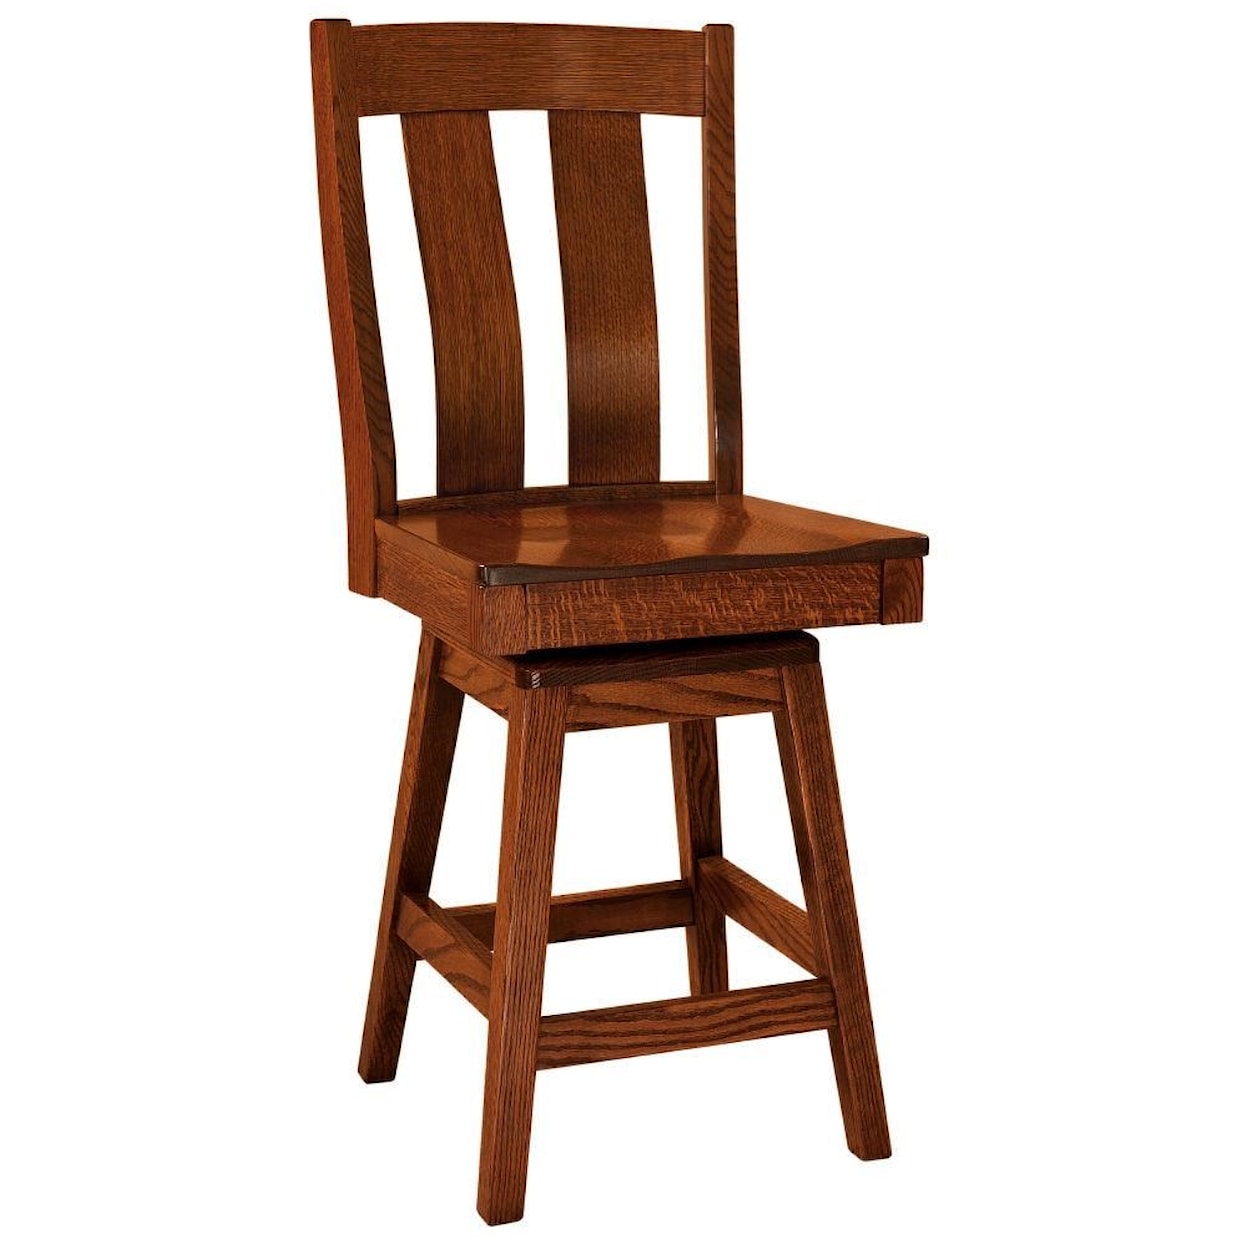 F&N Woodworking Laurie 30" Swivel Stool